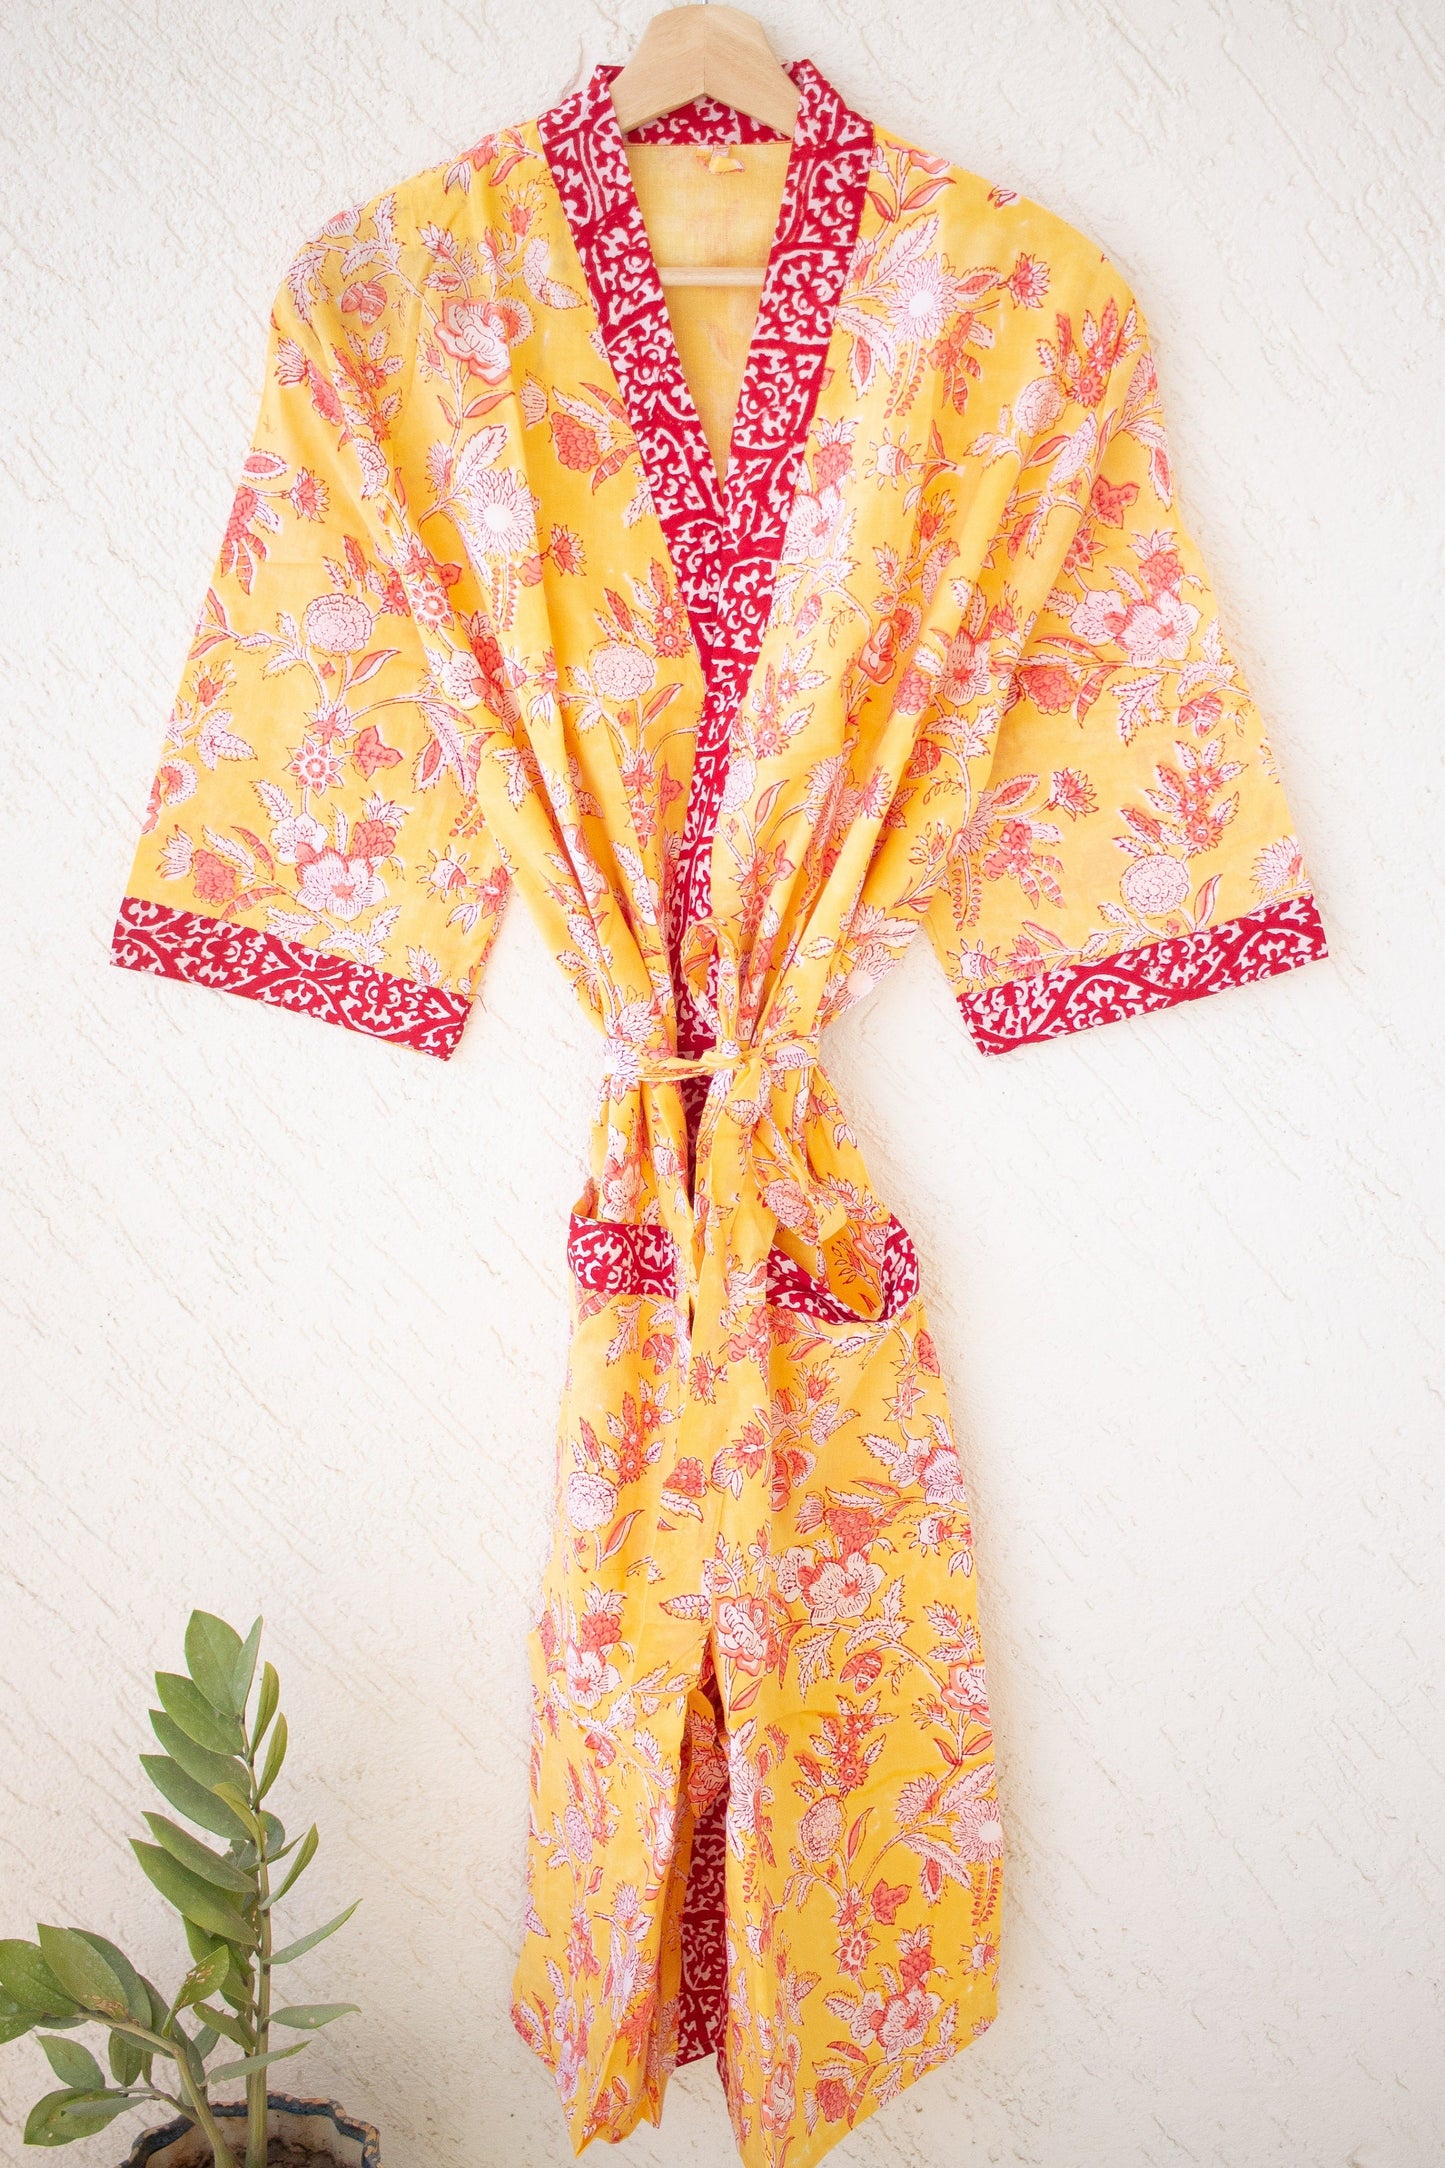 Cotton robes for women - Block print robes - beach cover up - yellow